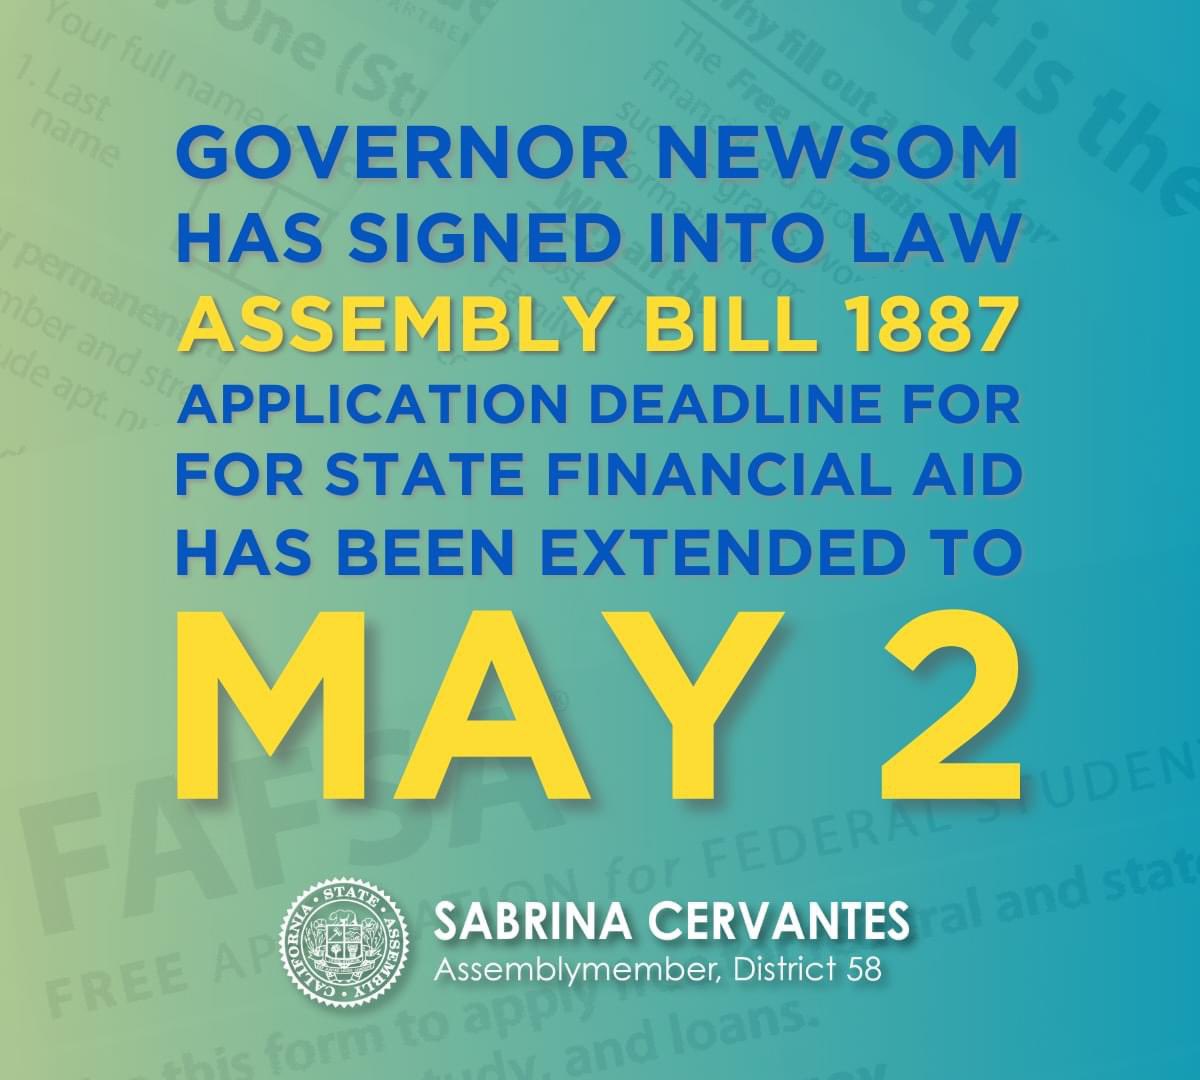 🚨ASSEMBLY BILL 1887 HAS BEEN SIGNED INTO LAW BY @CAgovernor @GavinNewsom! The application deadline for state financial aid programs like Cal Grant & Middle Class Scholarship is now extended to MAY 2, giving CA students more time to complete the #FAFSA! #DeliveringResults💪🏽 1/x